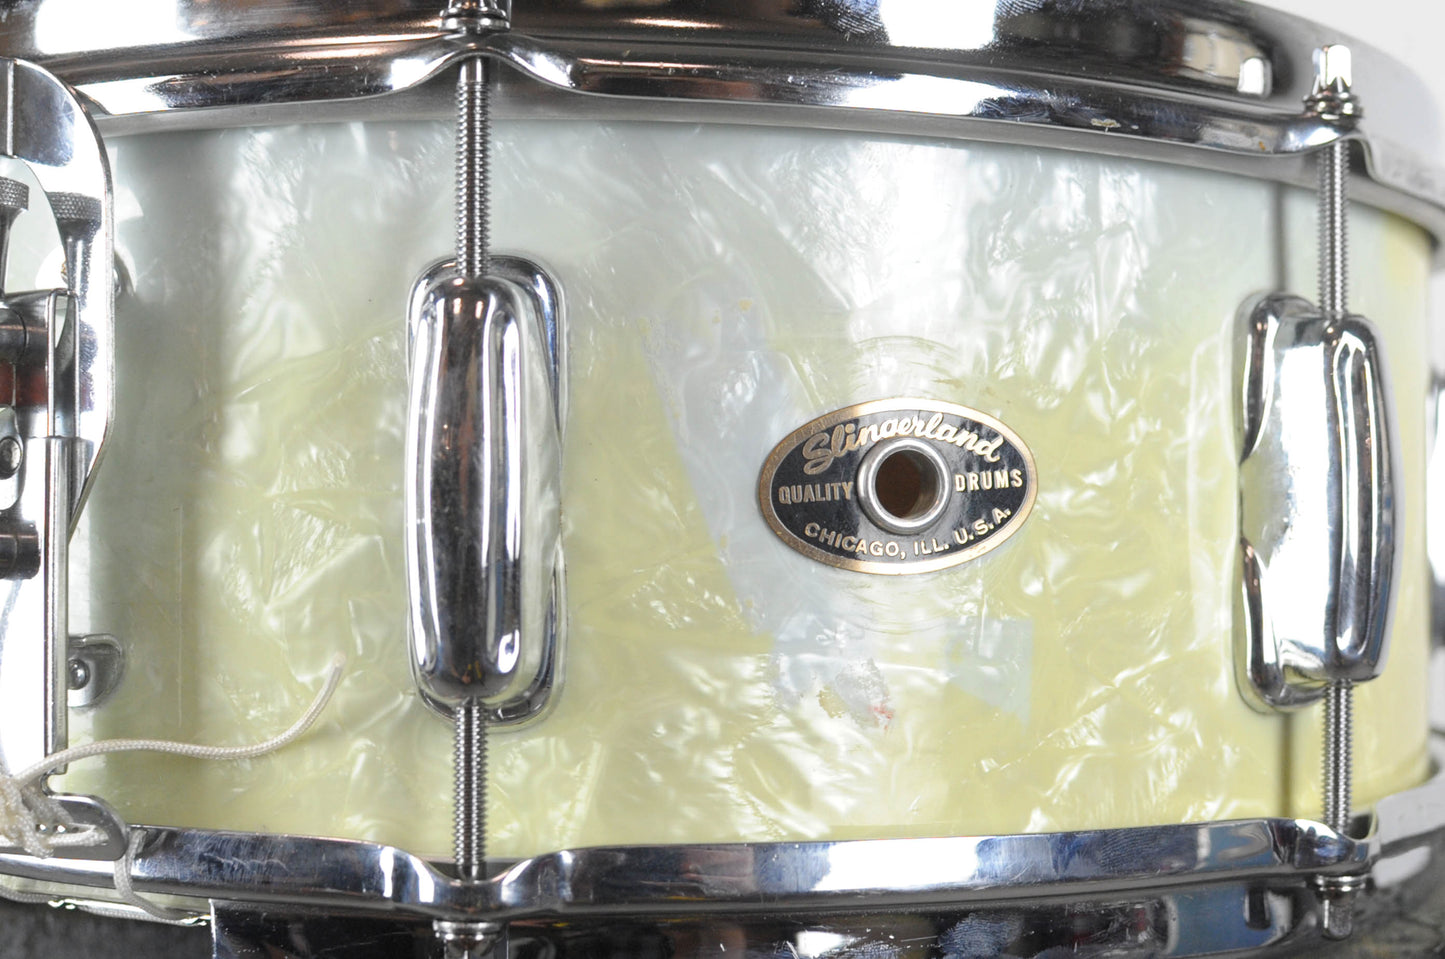 1950s Slingerland 5x14 Hollywood Ace White Marine Pearl Snare Drum